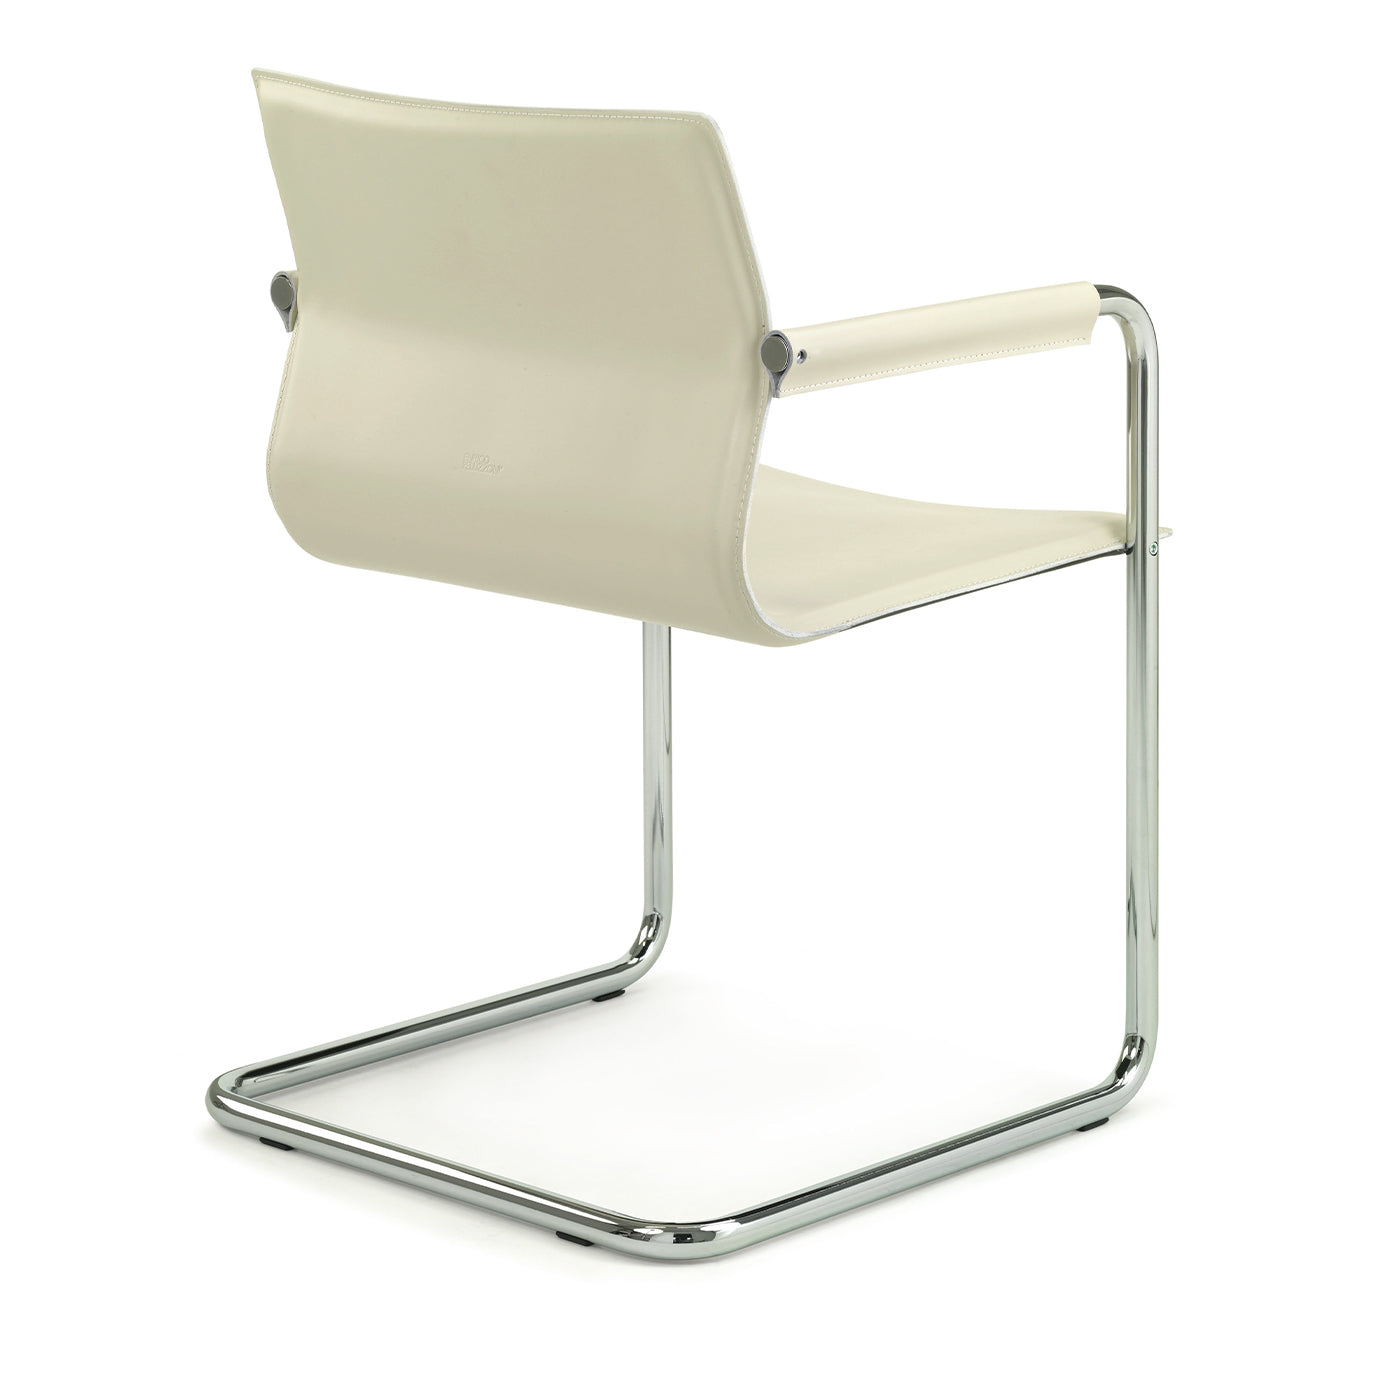  Lybra Chair With Covered Arms - Alternative view 3